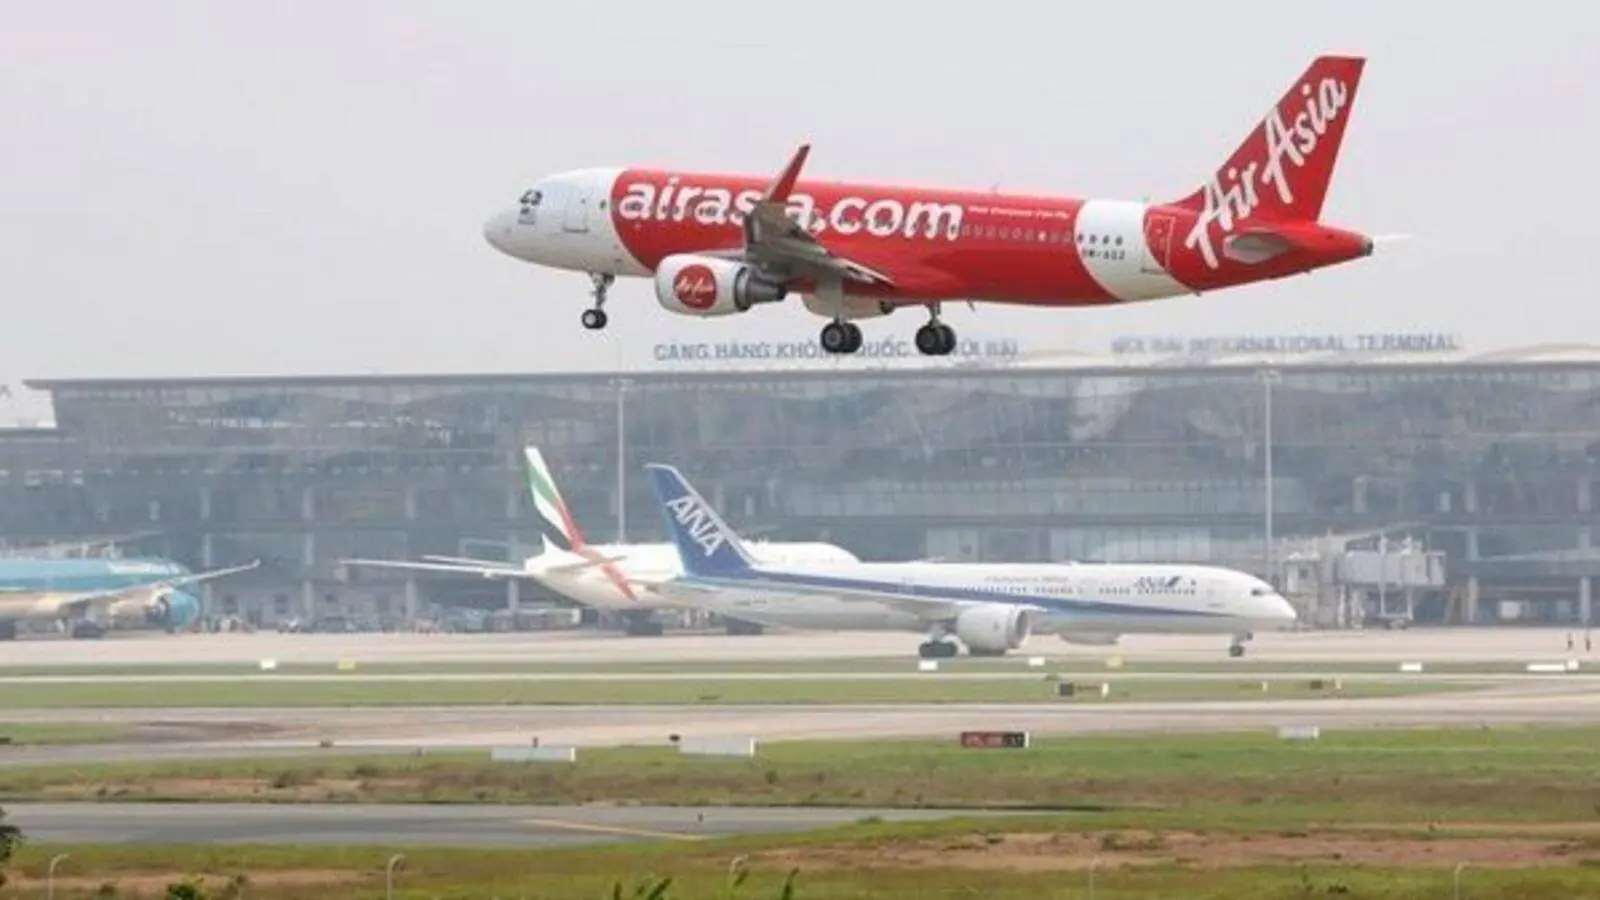 AirAsia brings a special offer, people will get a chance to win free air tickets